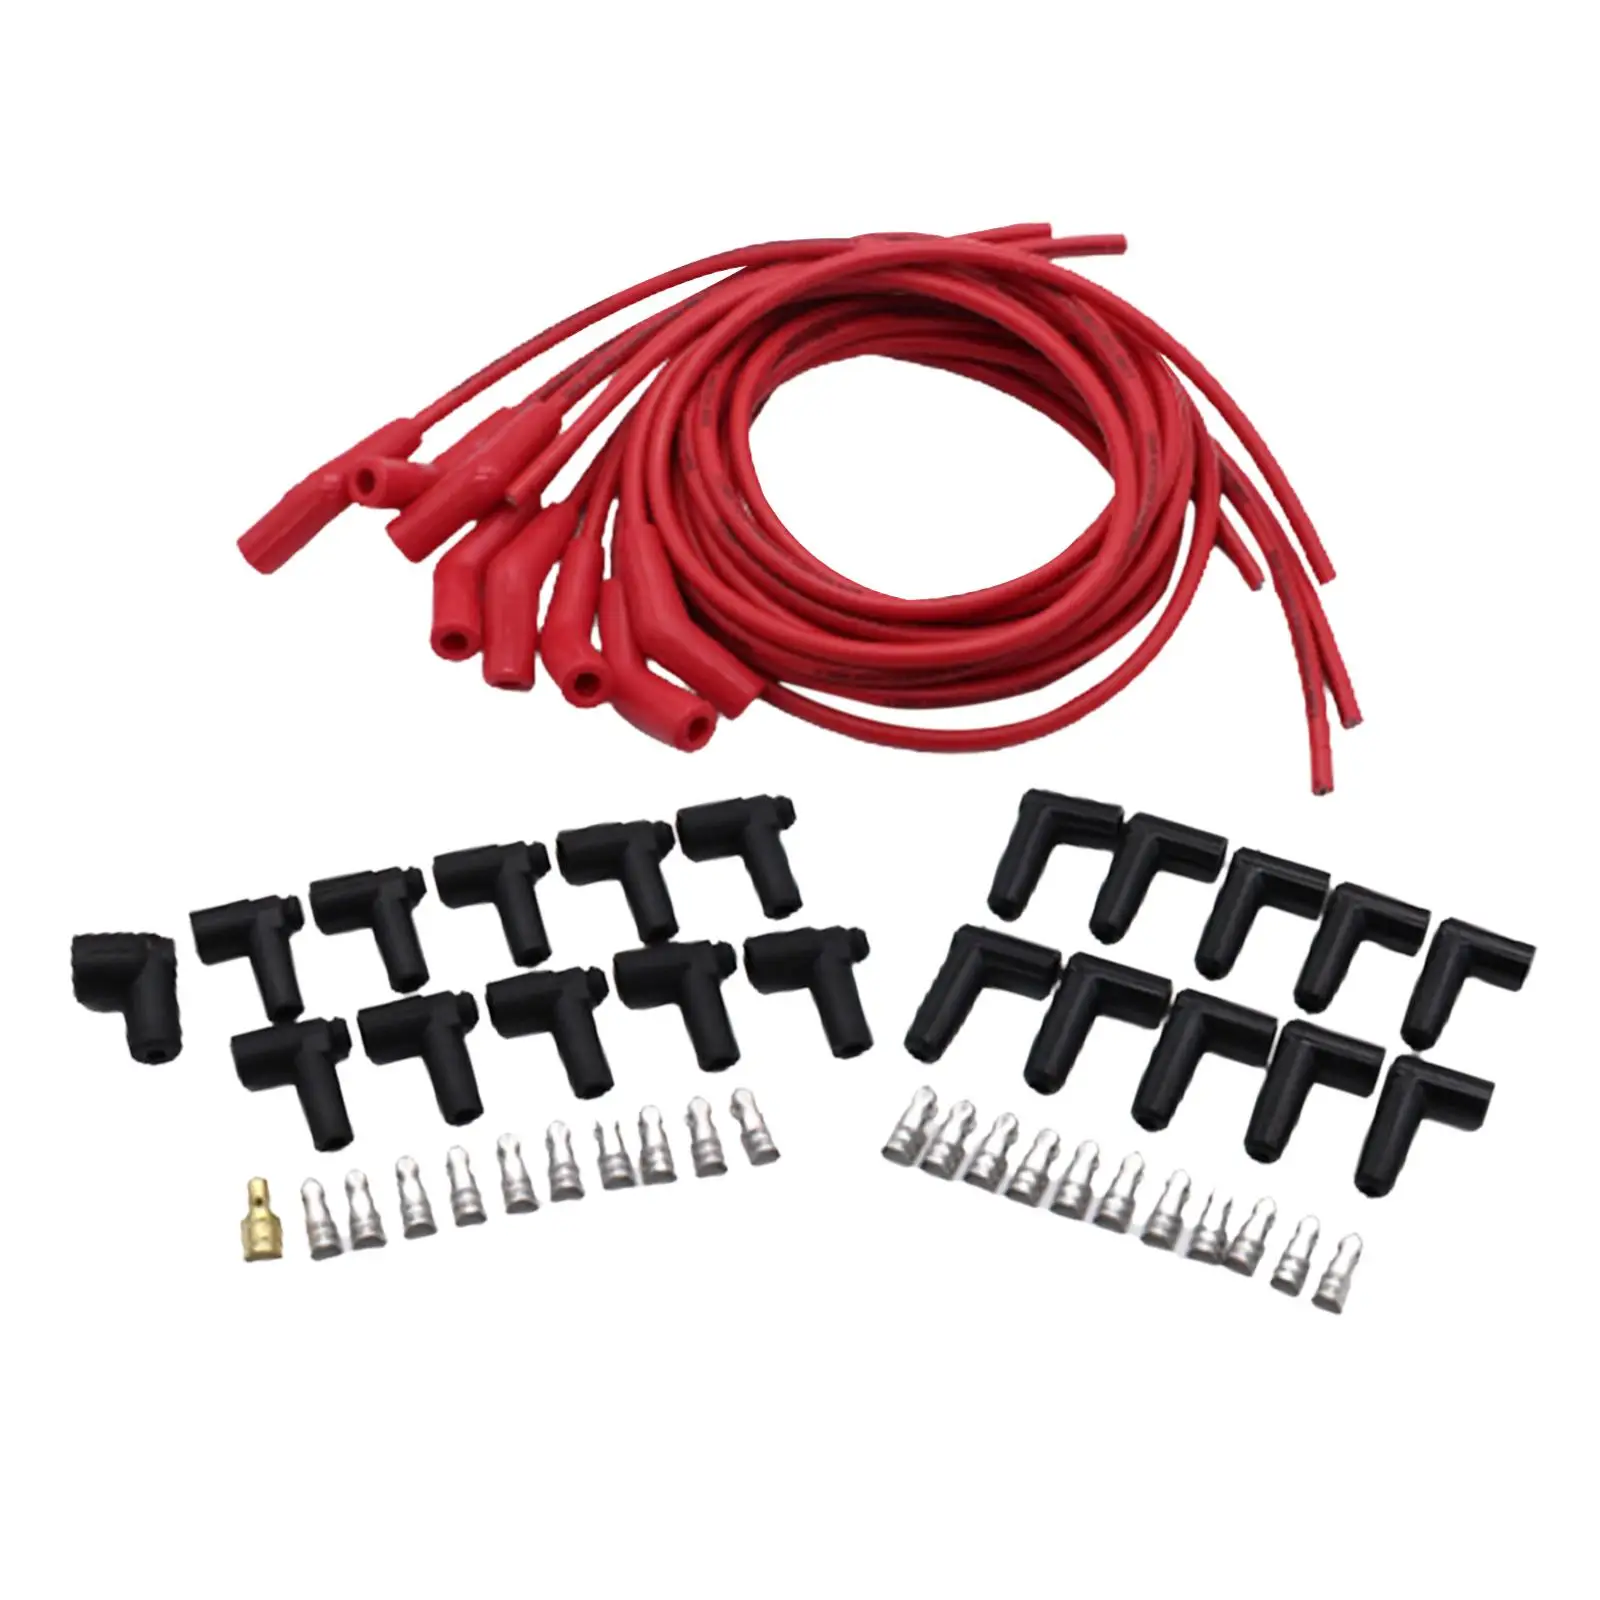 Spark Plug Wire Set Durable Car Accessories Replaces Premium Spare Parts Universal High Performance Red for Chevy